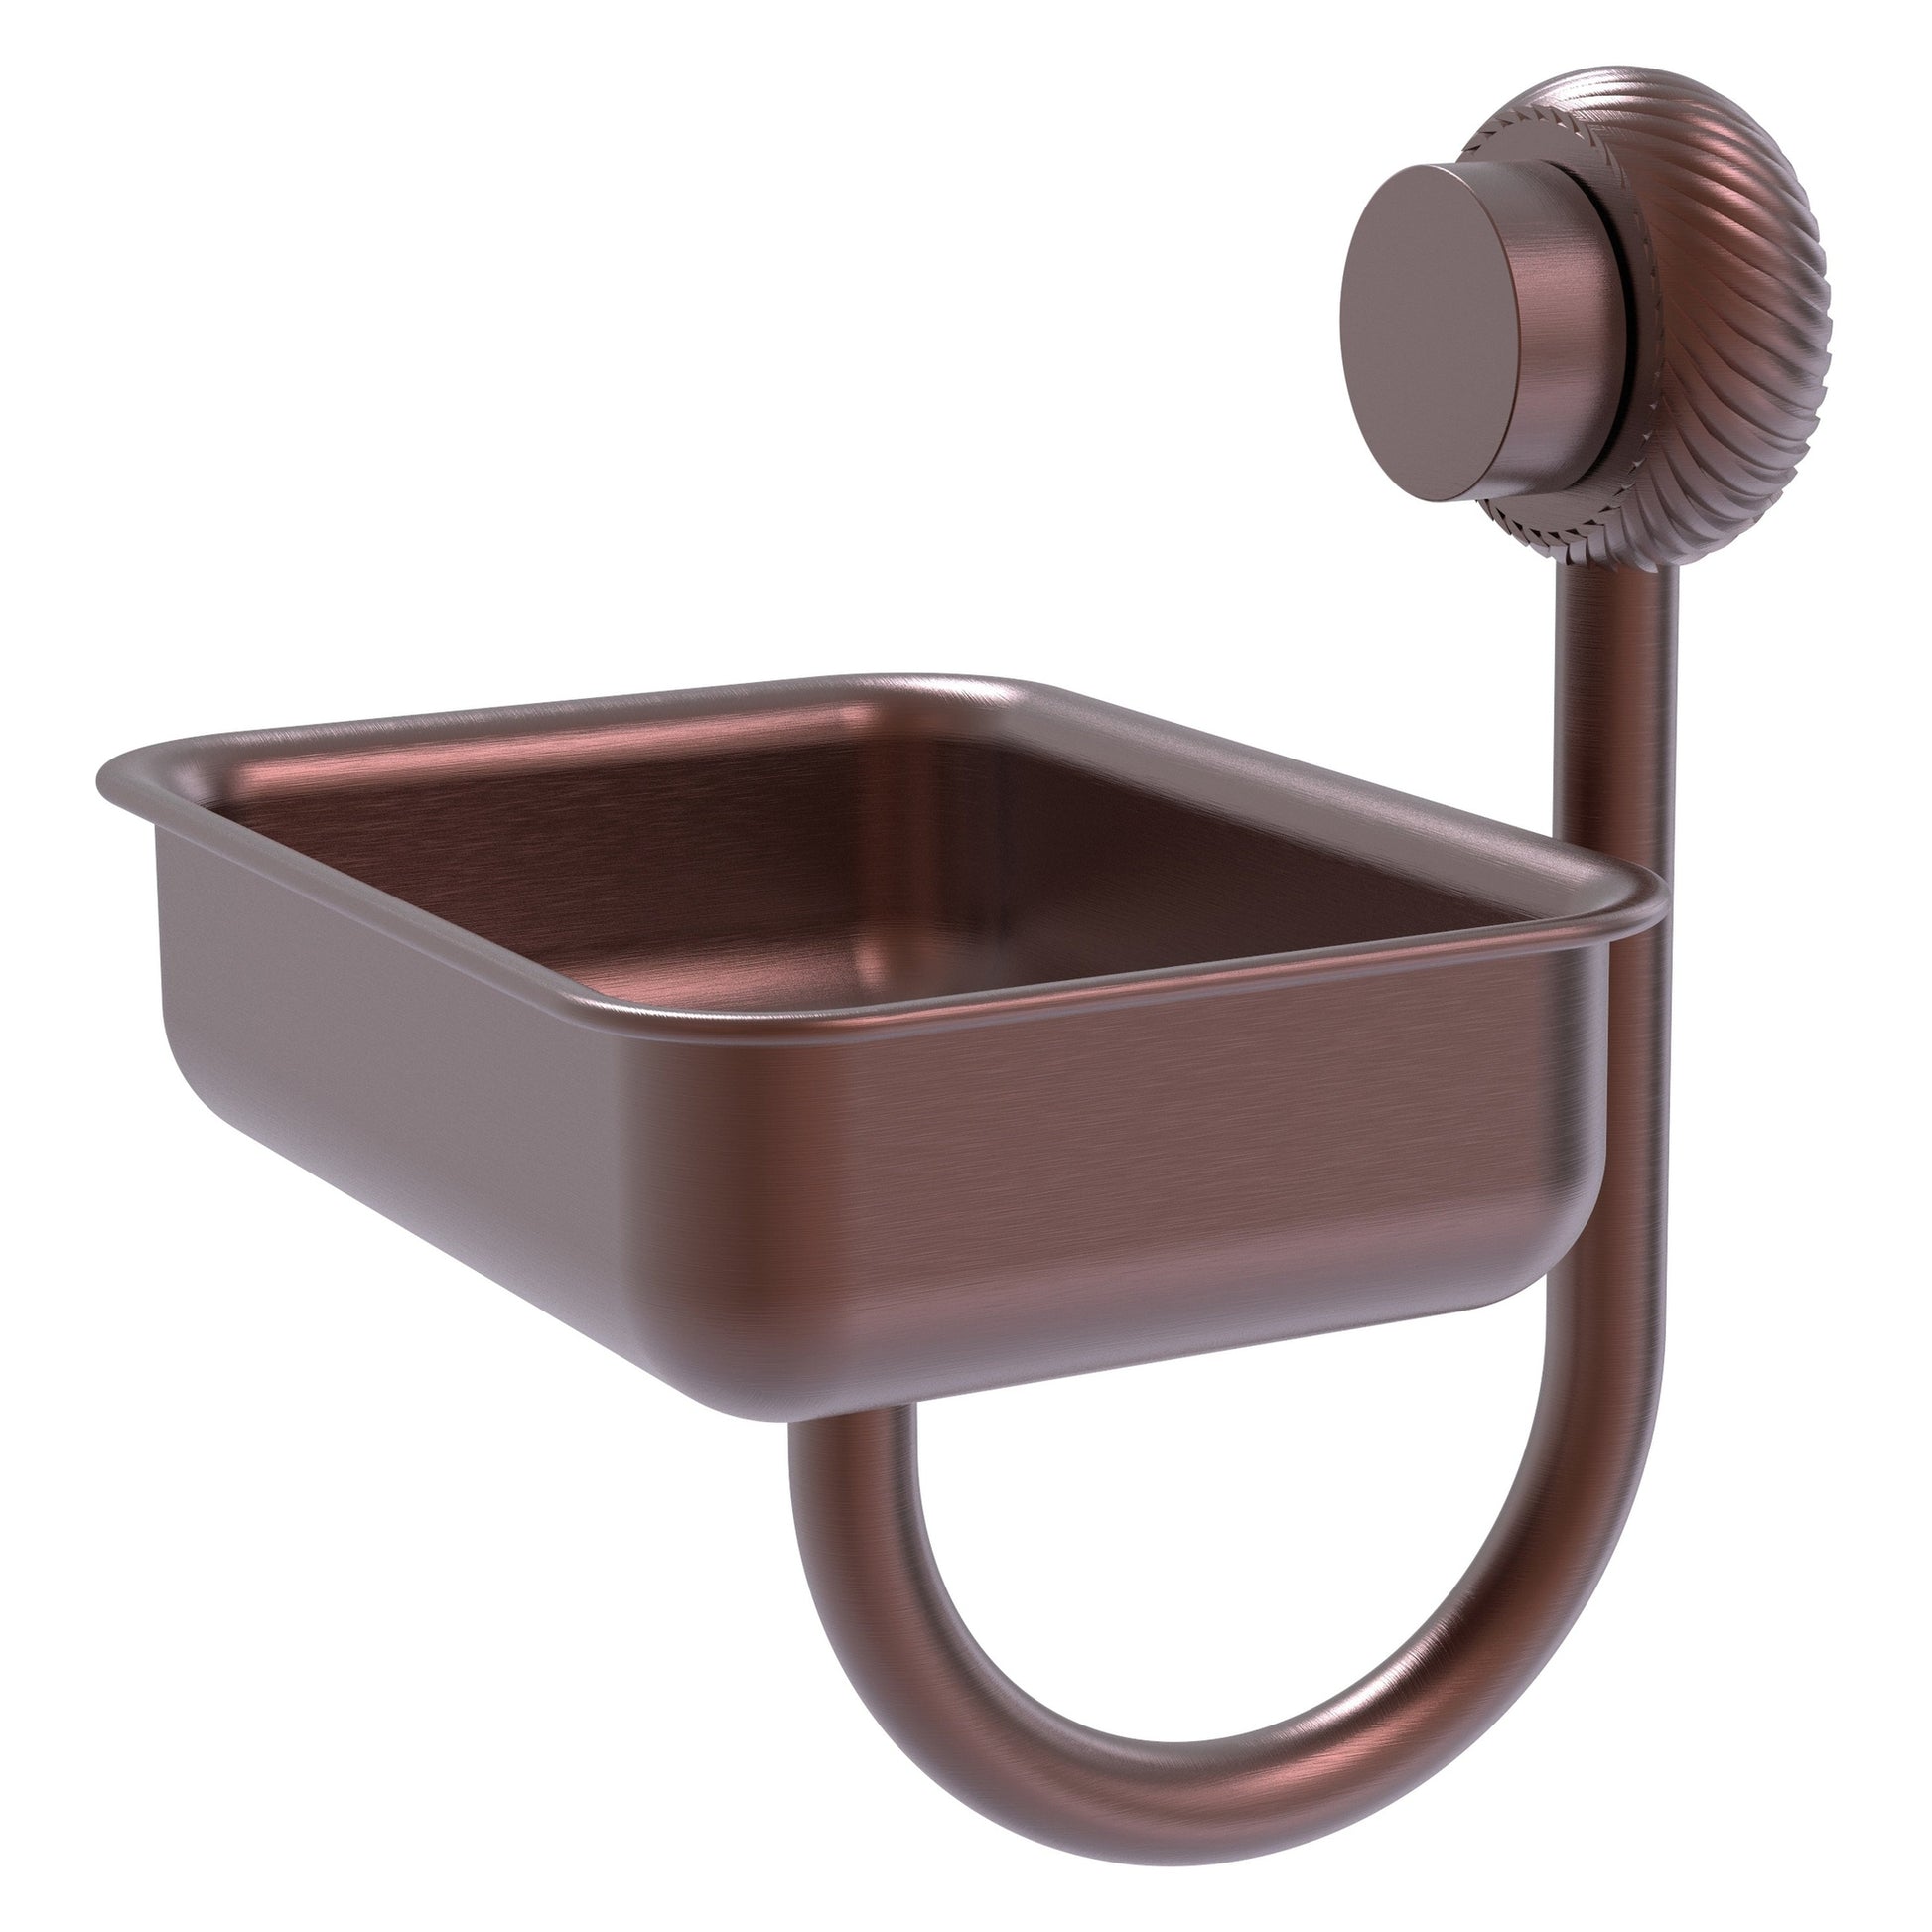 Allied Brass Venus 5" Antique Copper Solid Brass Wall-Mounted Soap Dish With Twisted Accents